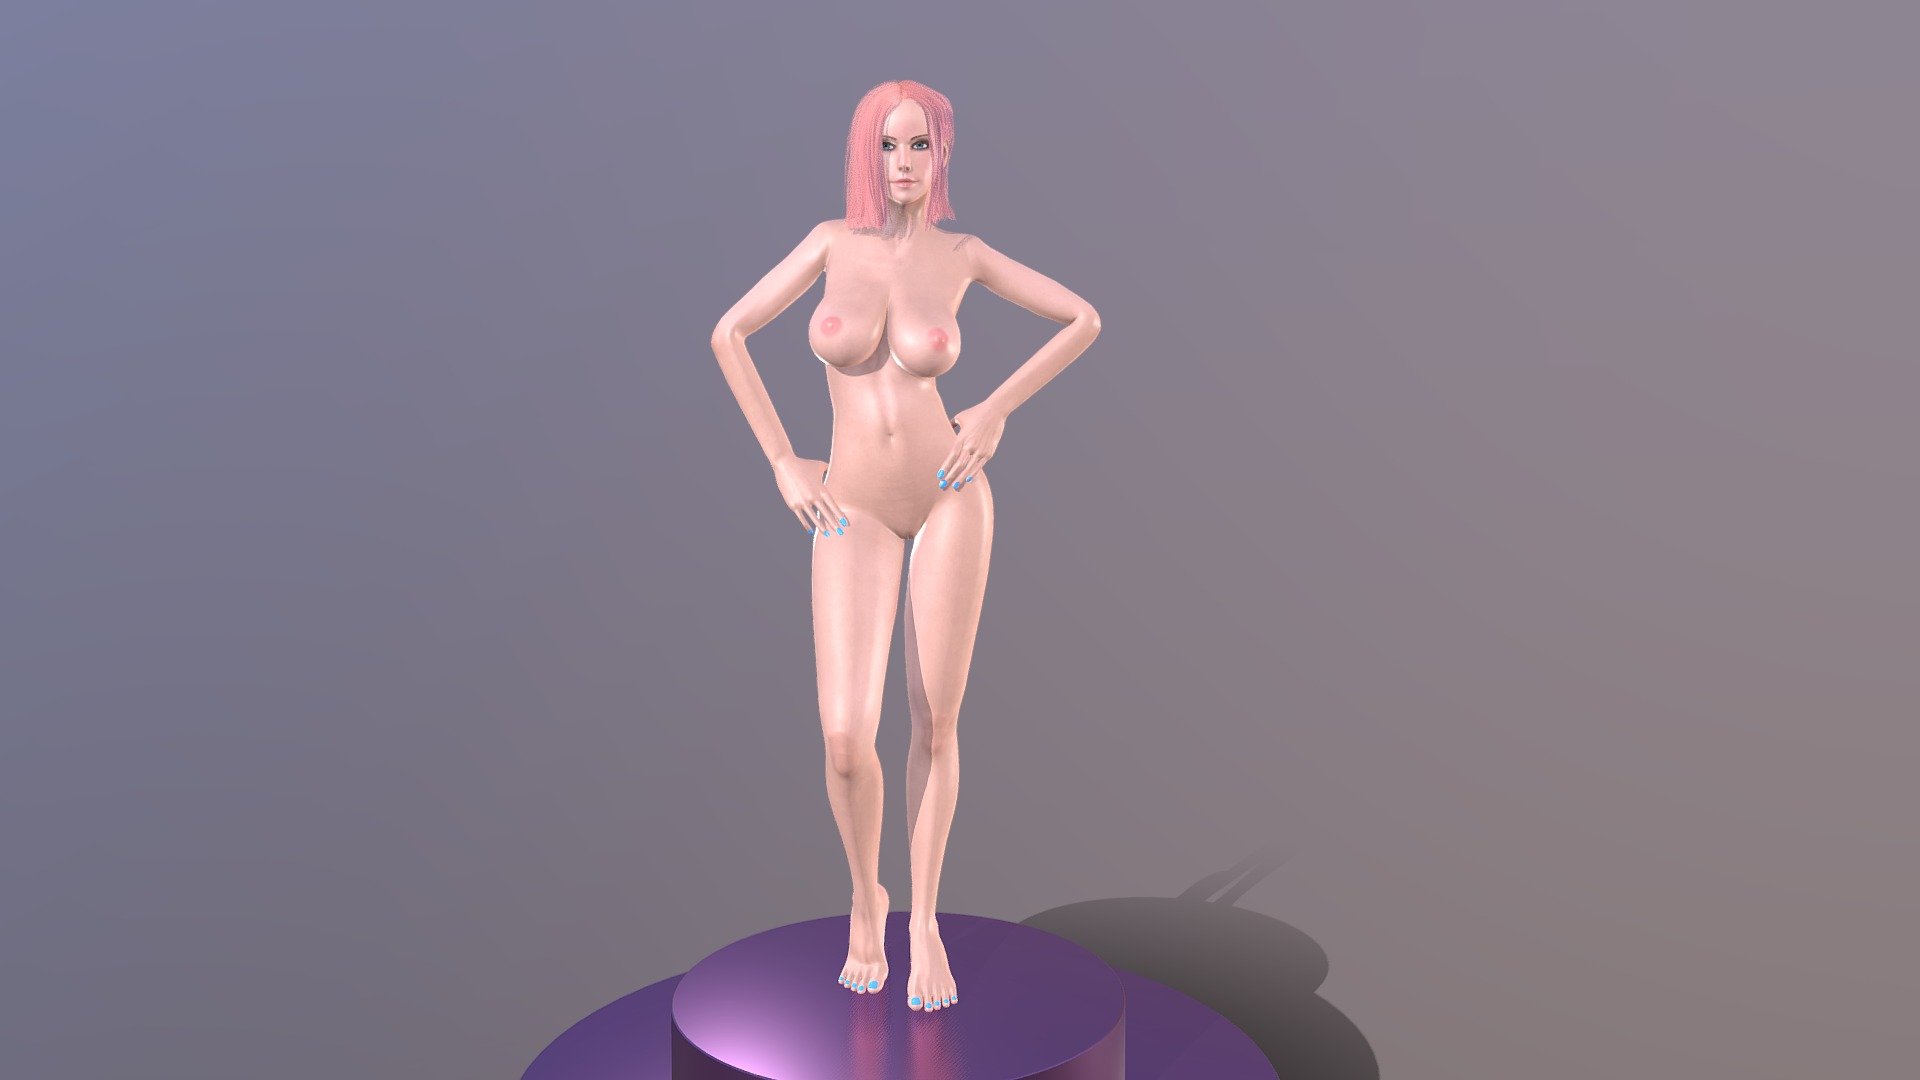 A customizable character for UE4 and Blender.

Available on Blender Market.

See video for details: https://www.youtube.com/watch?v=BoJ1530F9-Y - Tanya Nude - 3D model by radeonoff 3d model